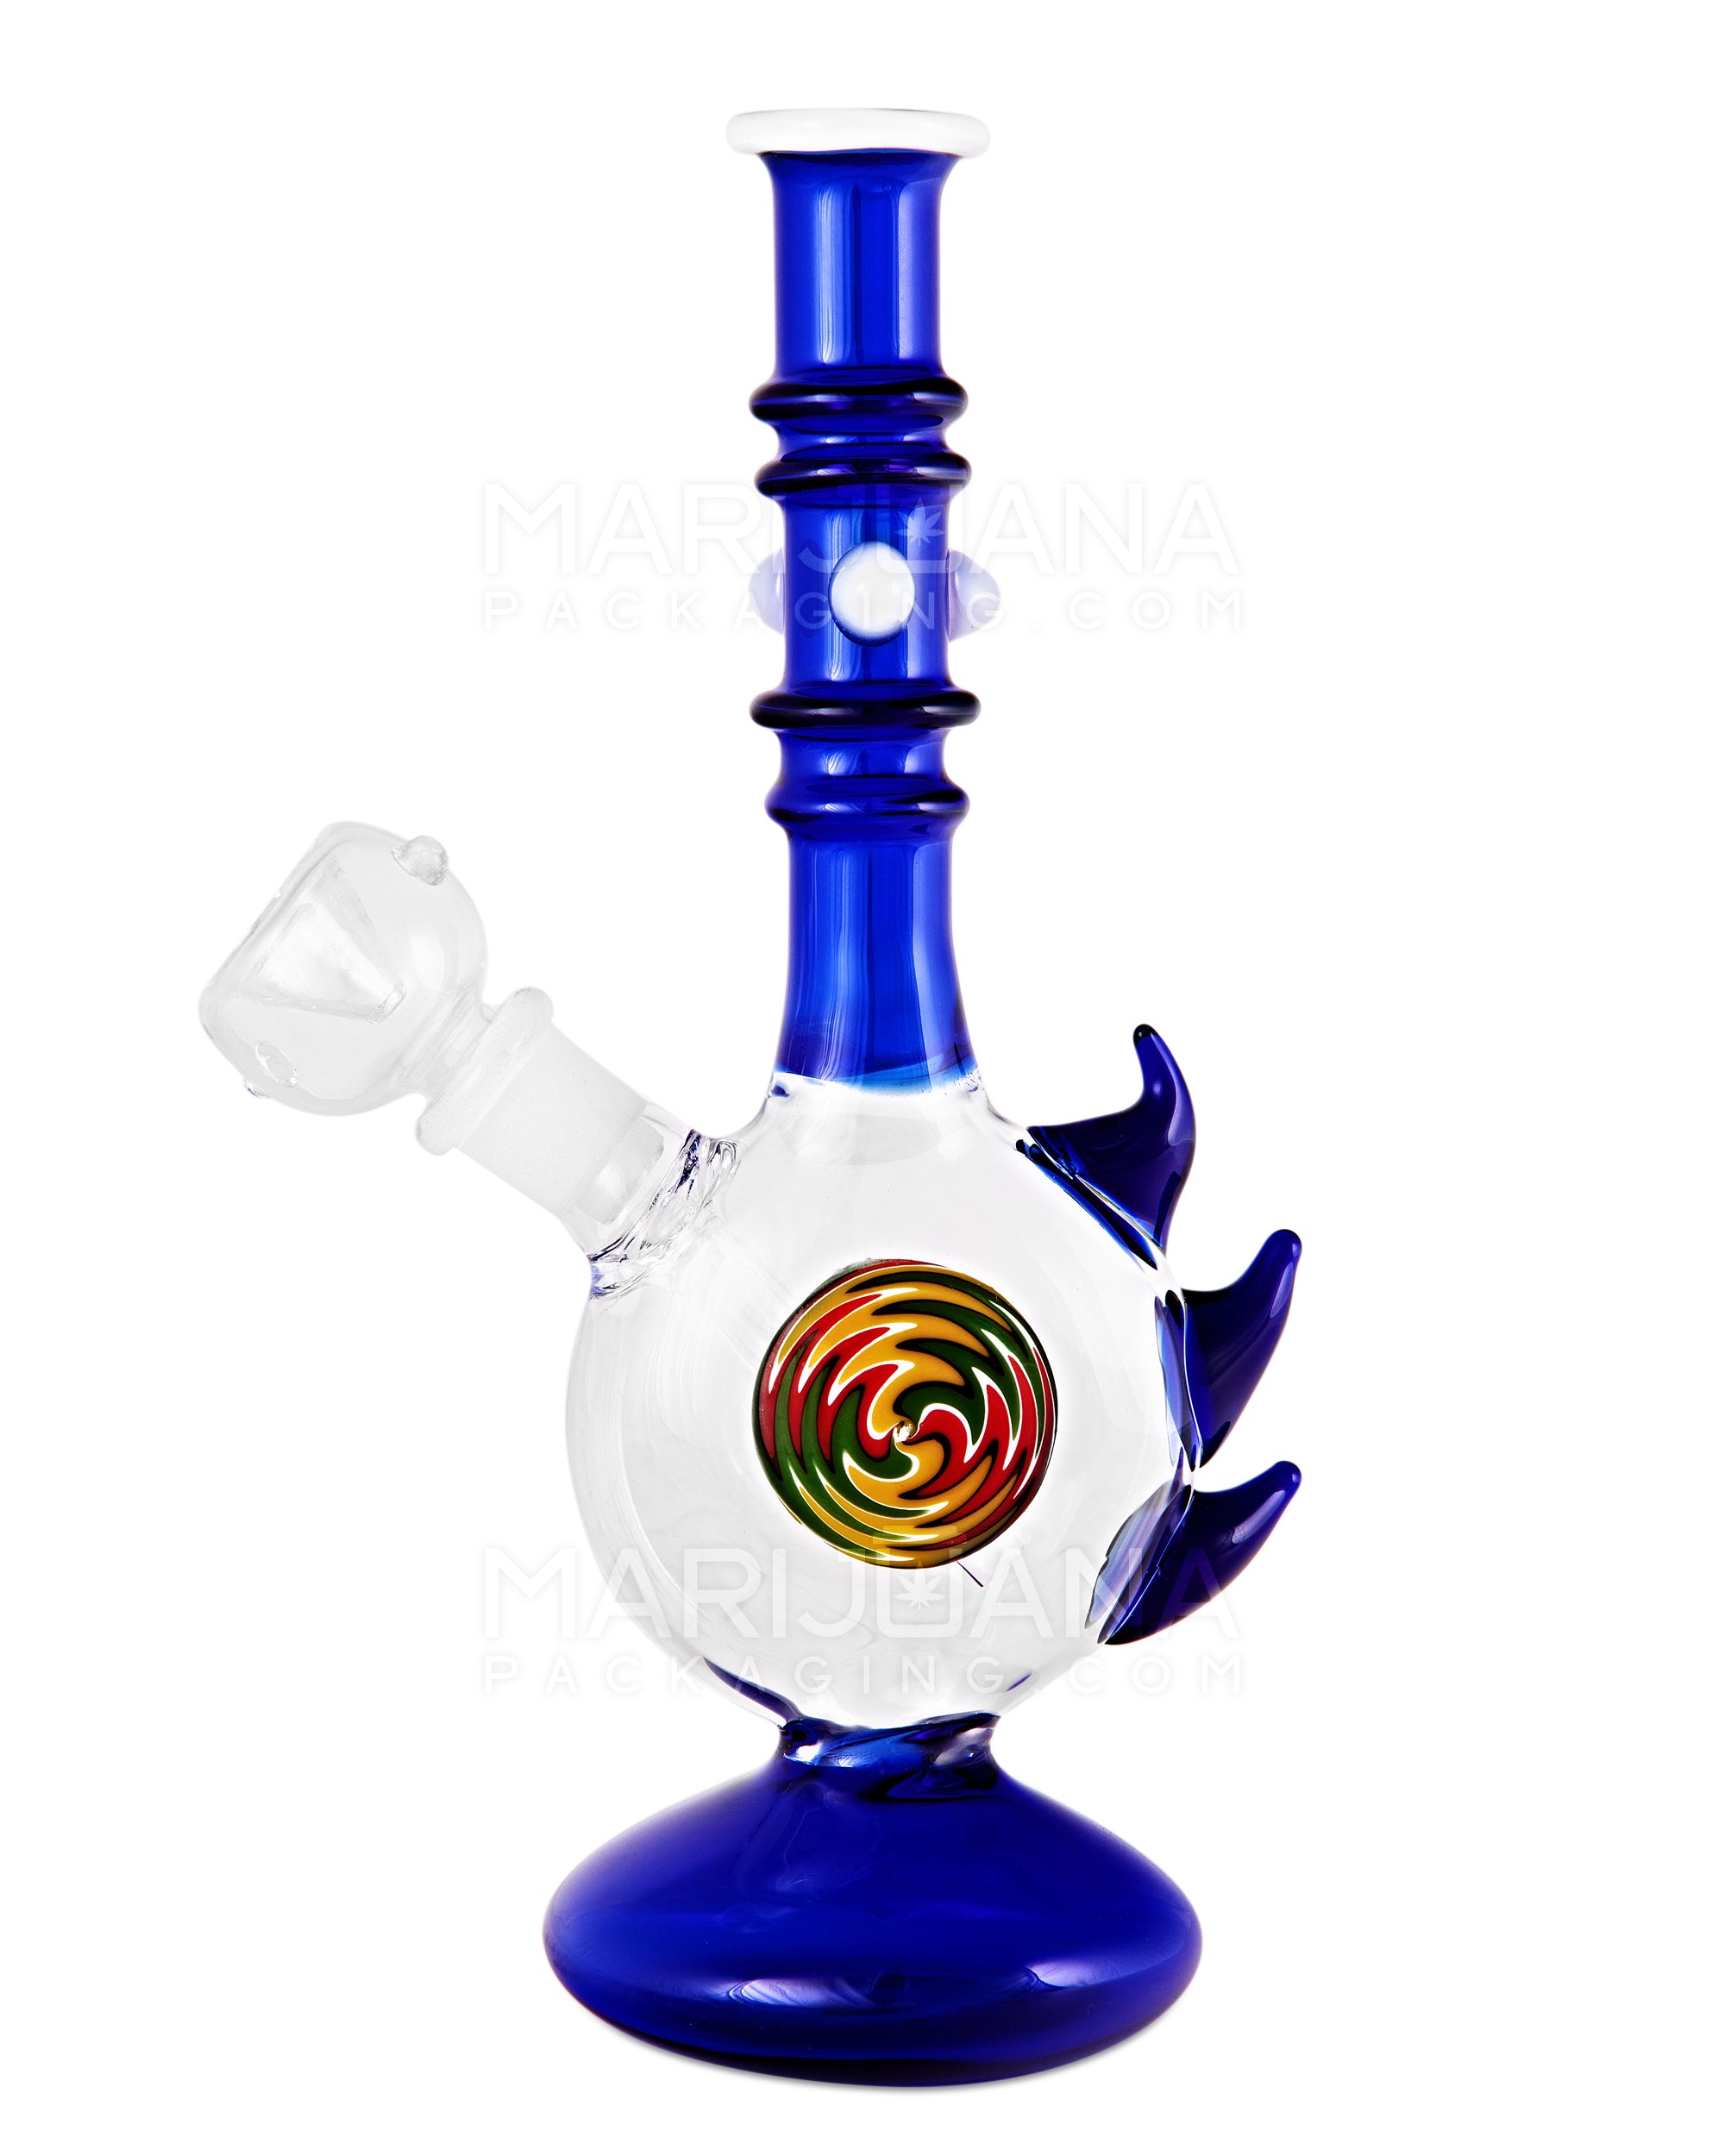 Straight Neck Wig Wag Circular Flask Glass Water Pipe w/ Triple Spikes | 8in Tall - 14mm Bowl - Blue - 1